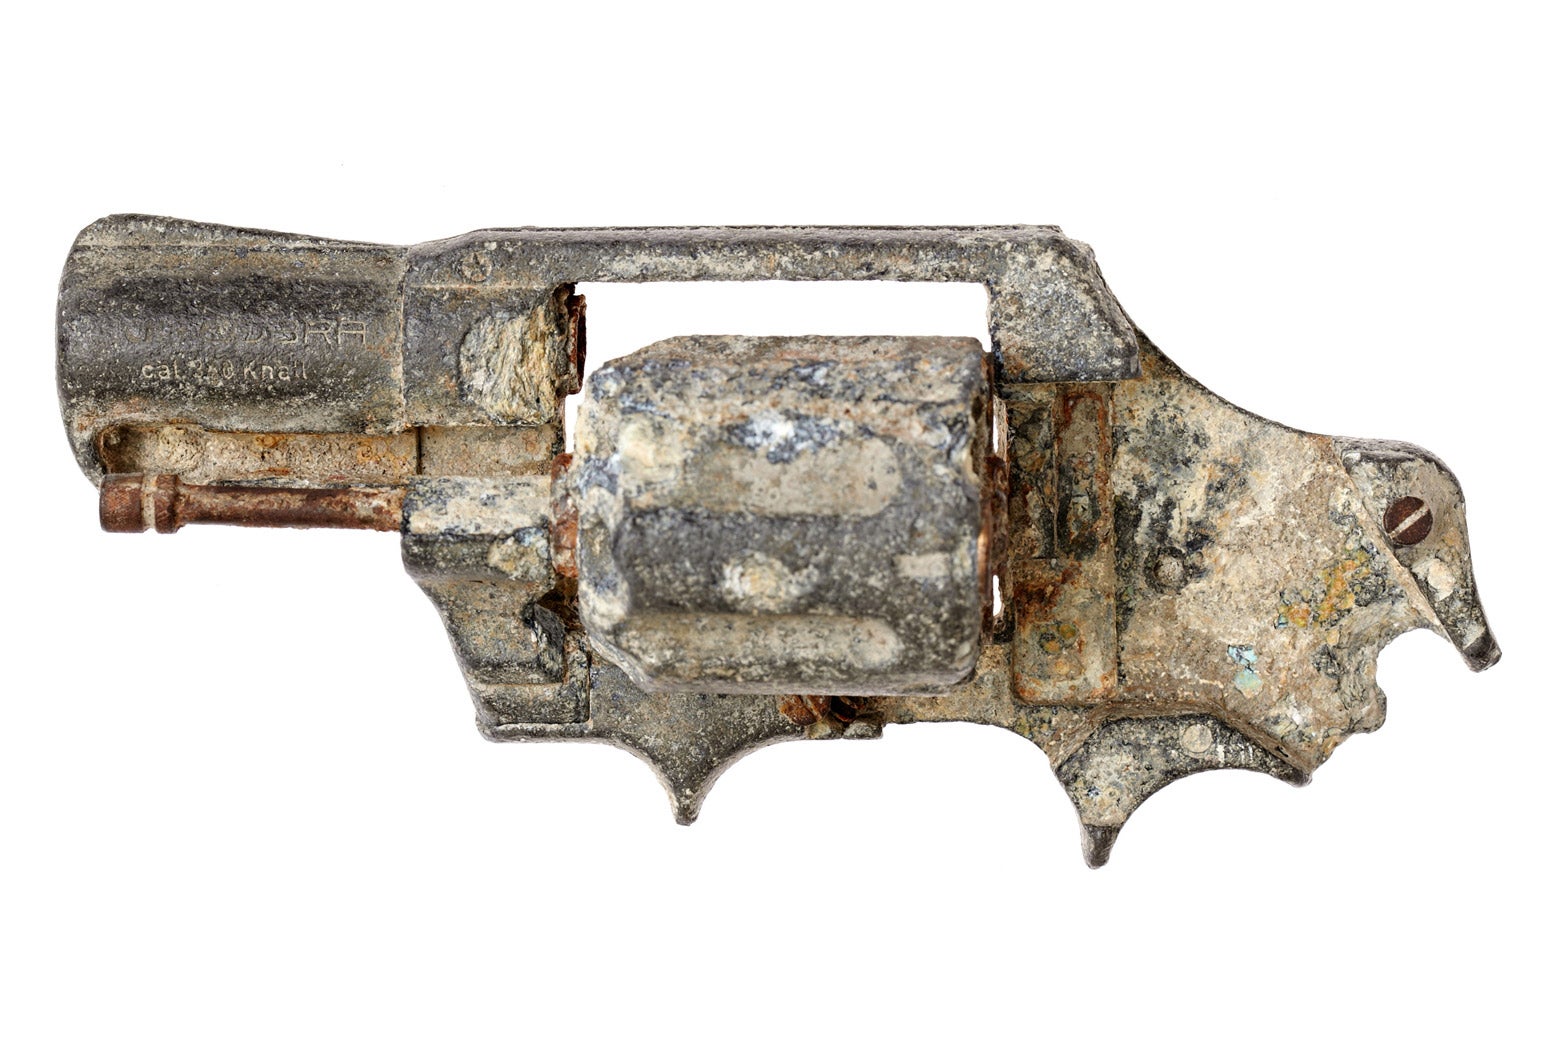 A revolver, dated sometime after 1975, found during the excavations.